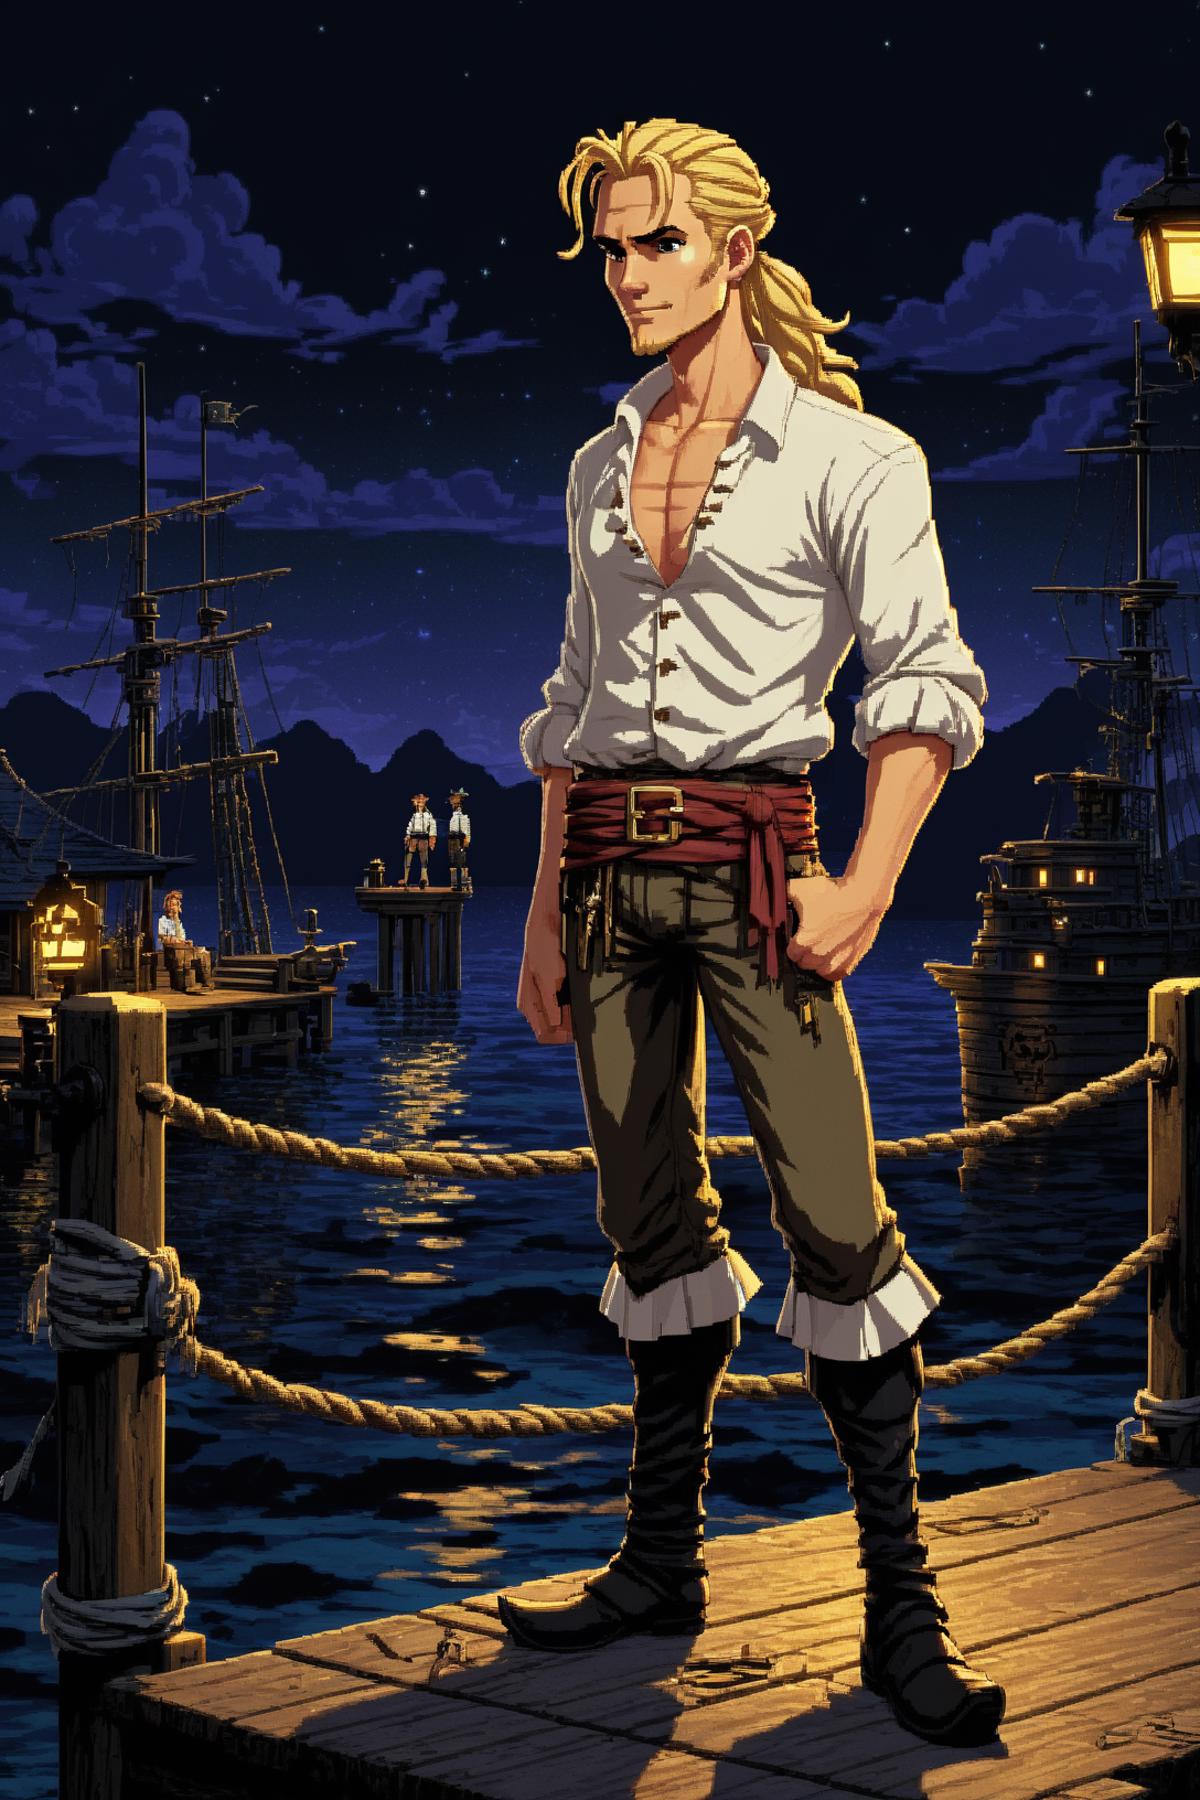 A man standing on a dock at night, with a pirate ship in the background.